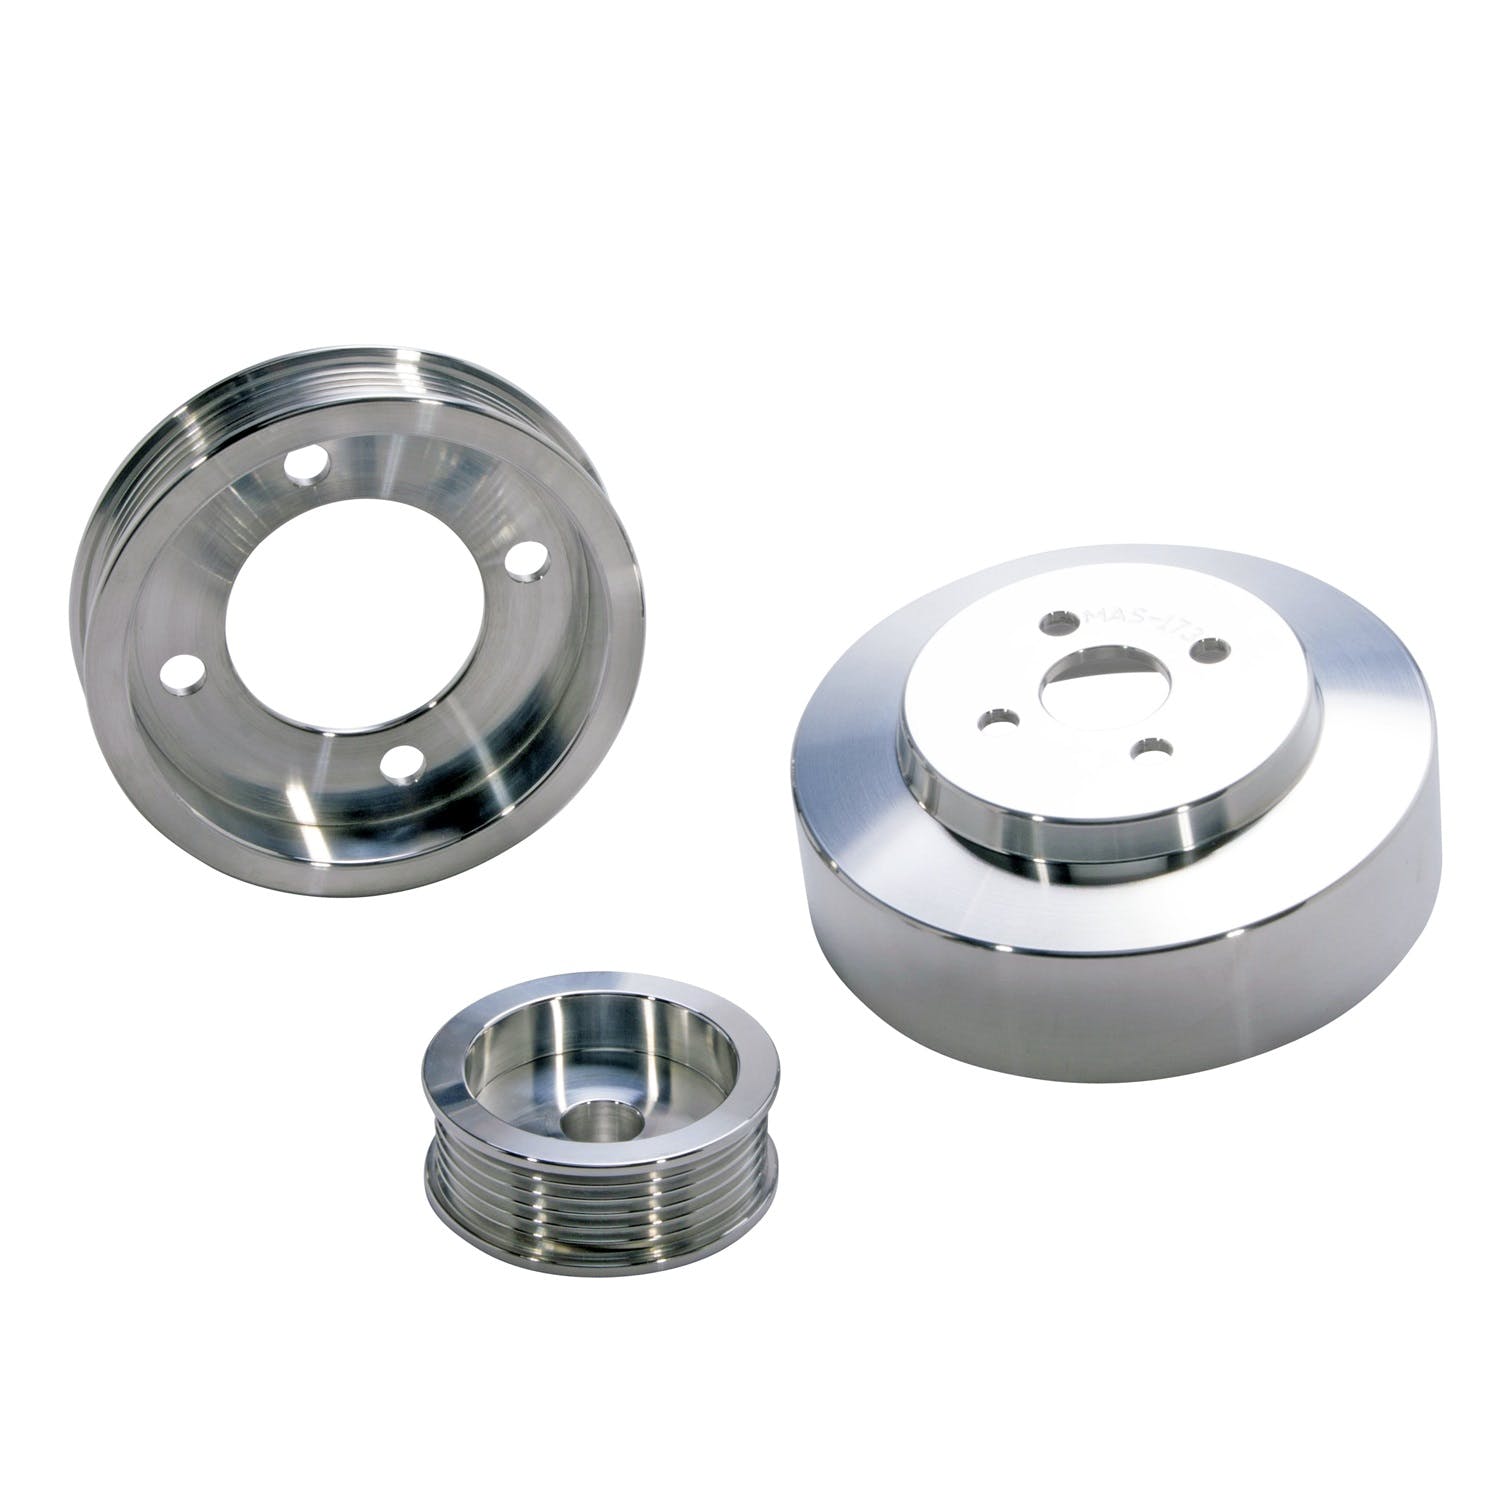 BBK Performance Parts 1554 Power-Plus Series Underdrive Pulley System